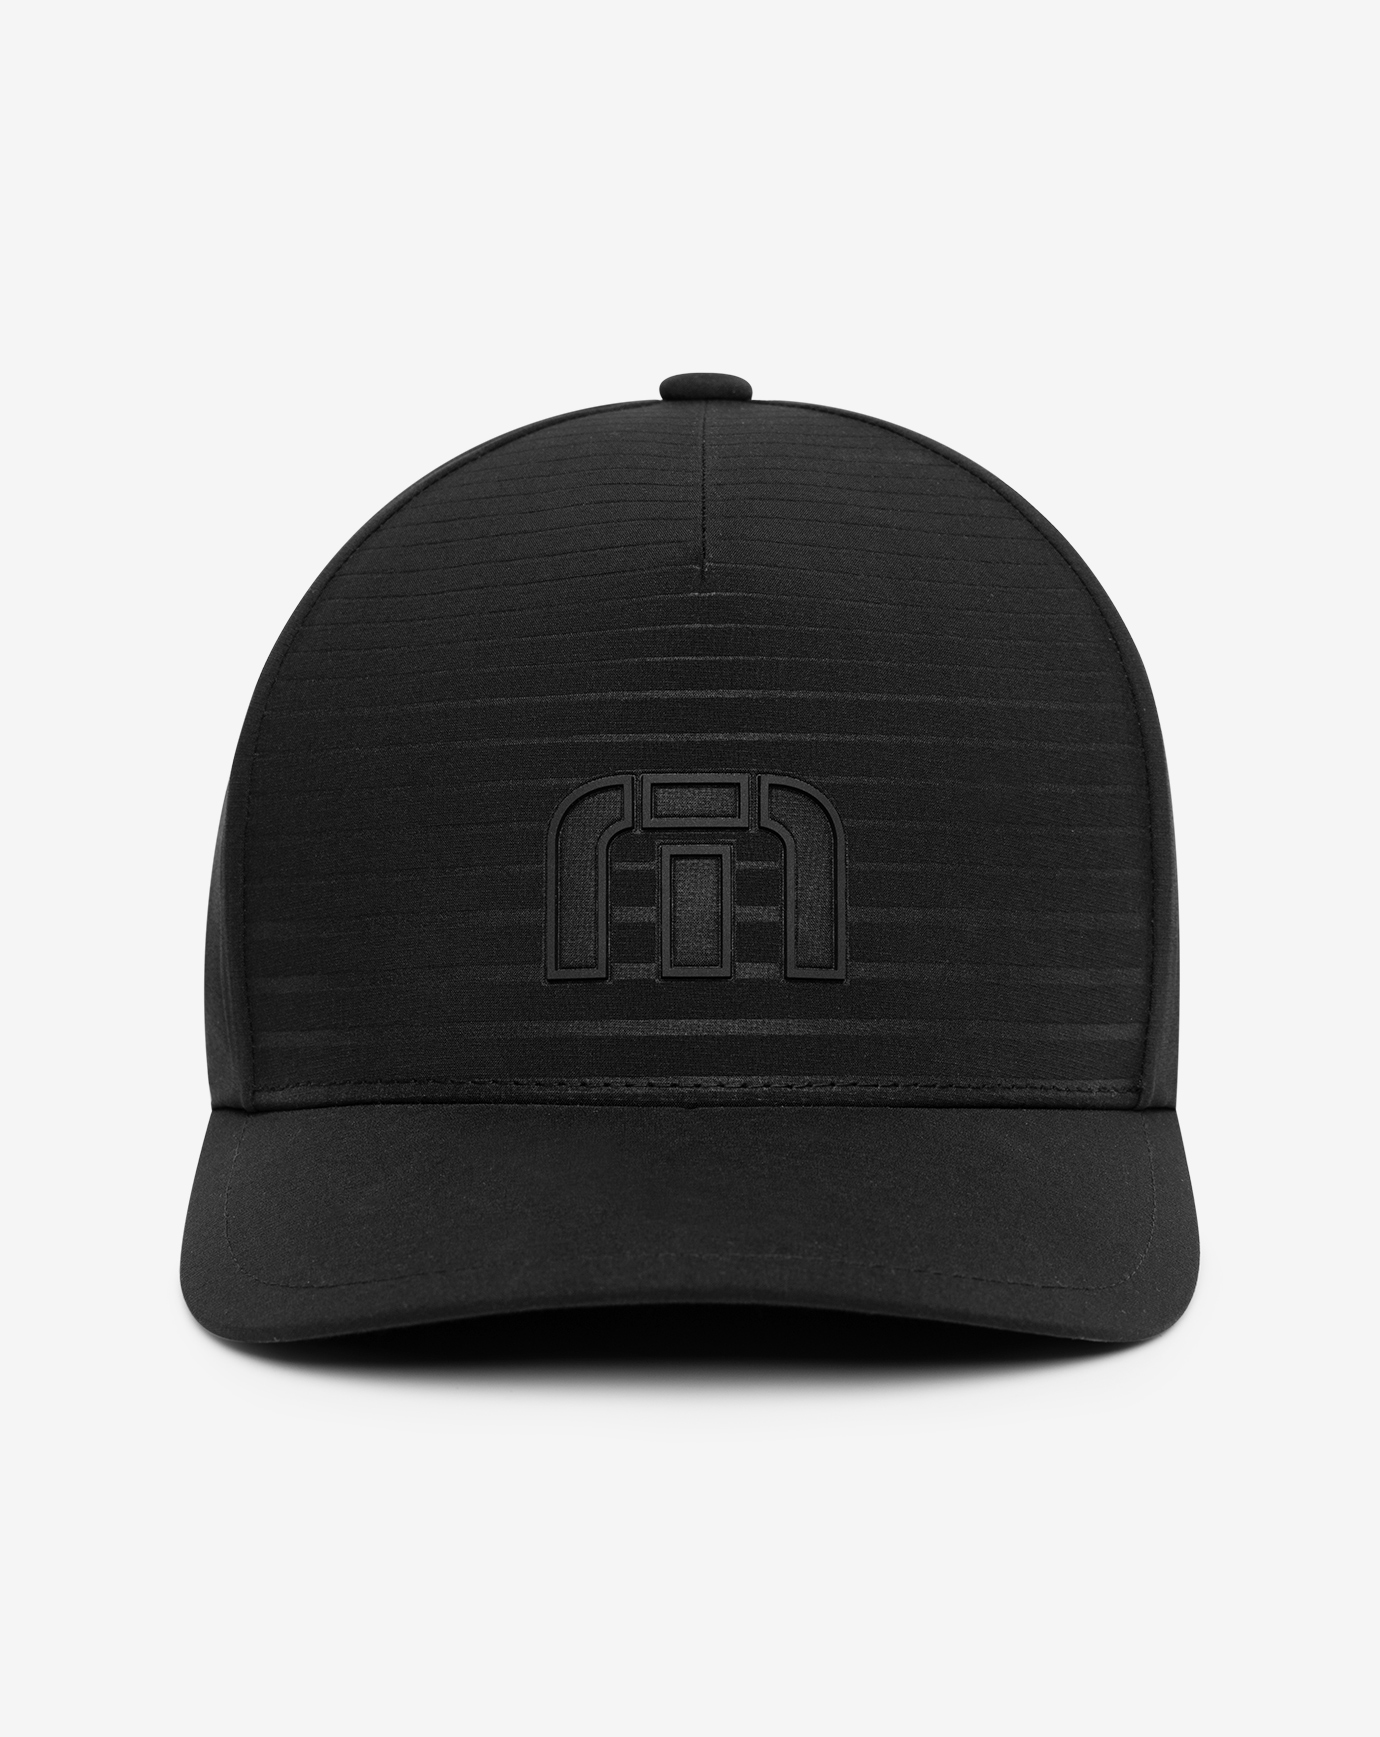 TAHONA HEATER TECH FITTED HAT 1